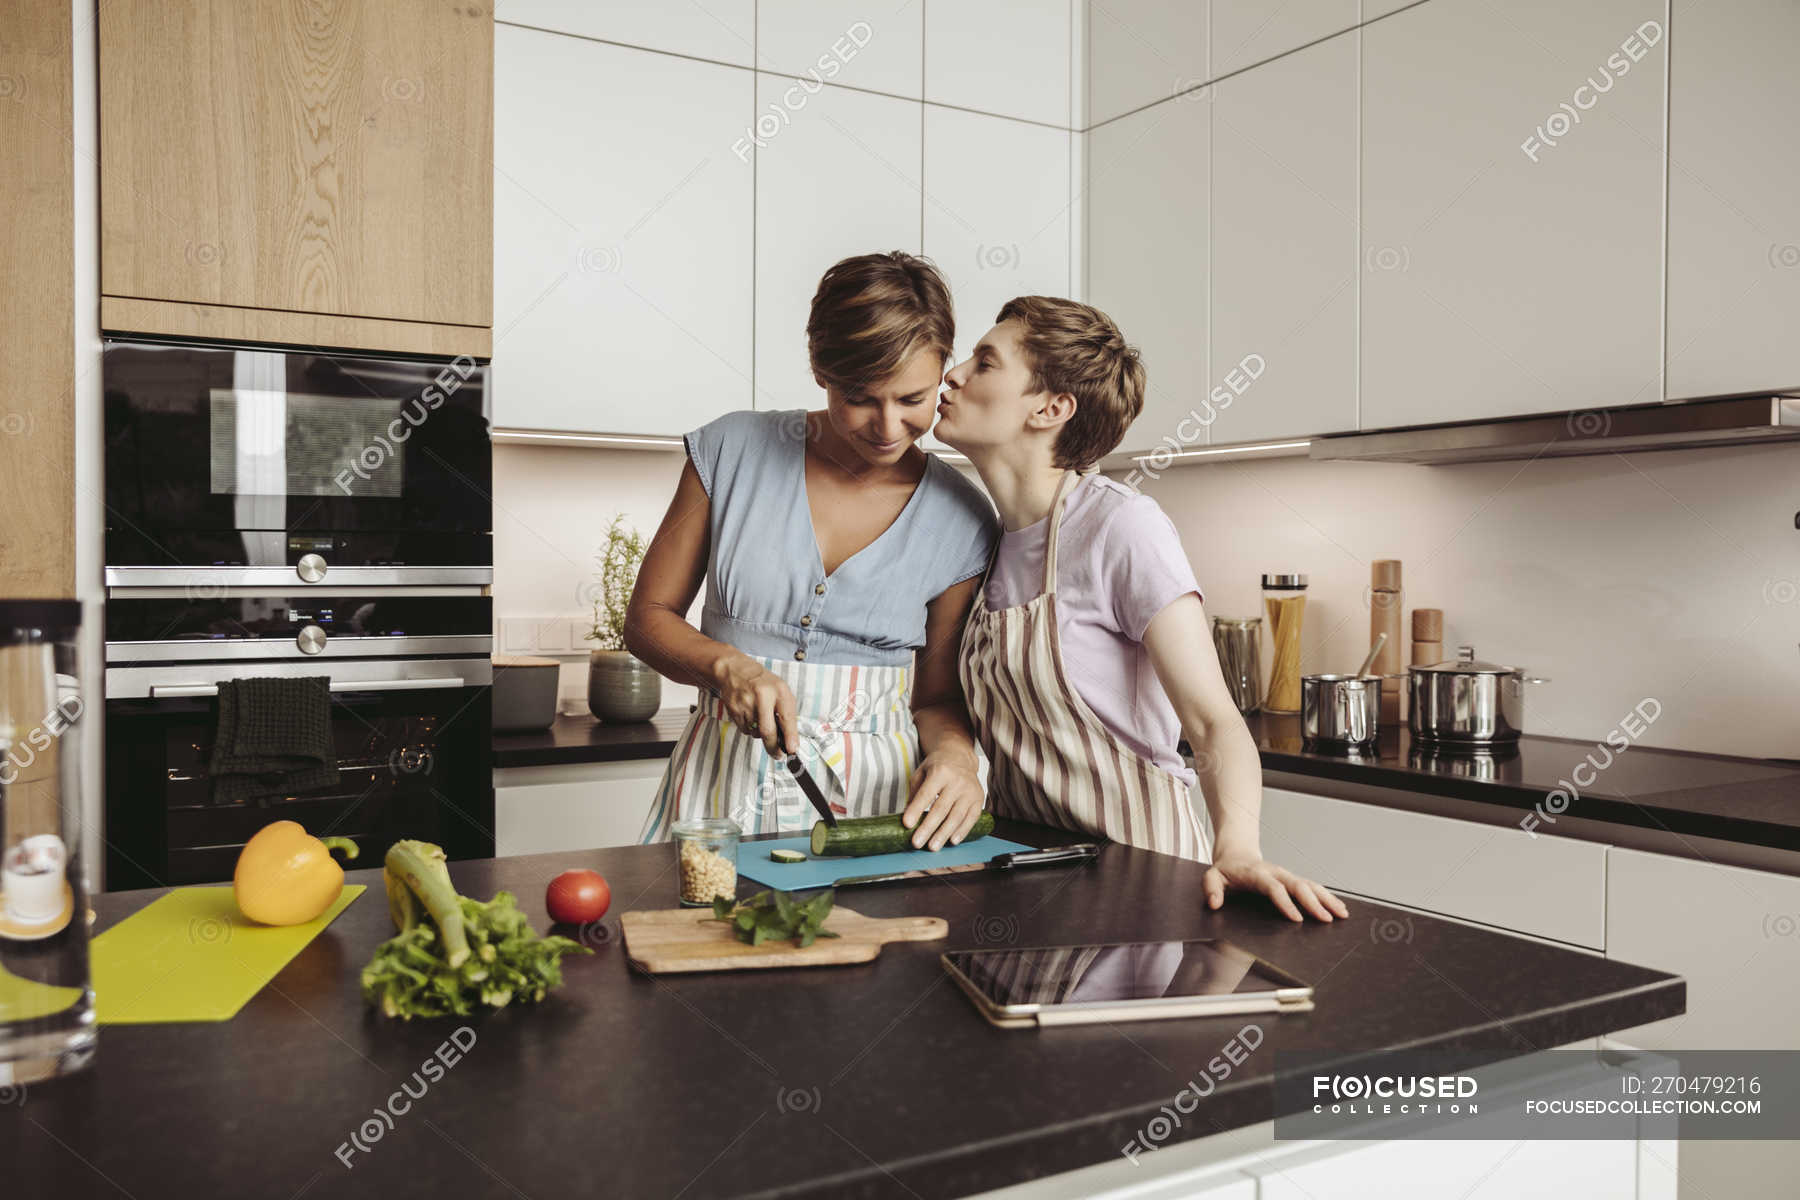 Focused 270479216 Stock Photo Happy Lesbian Couple Kitchen Cooking 